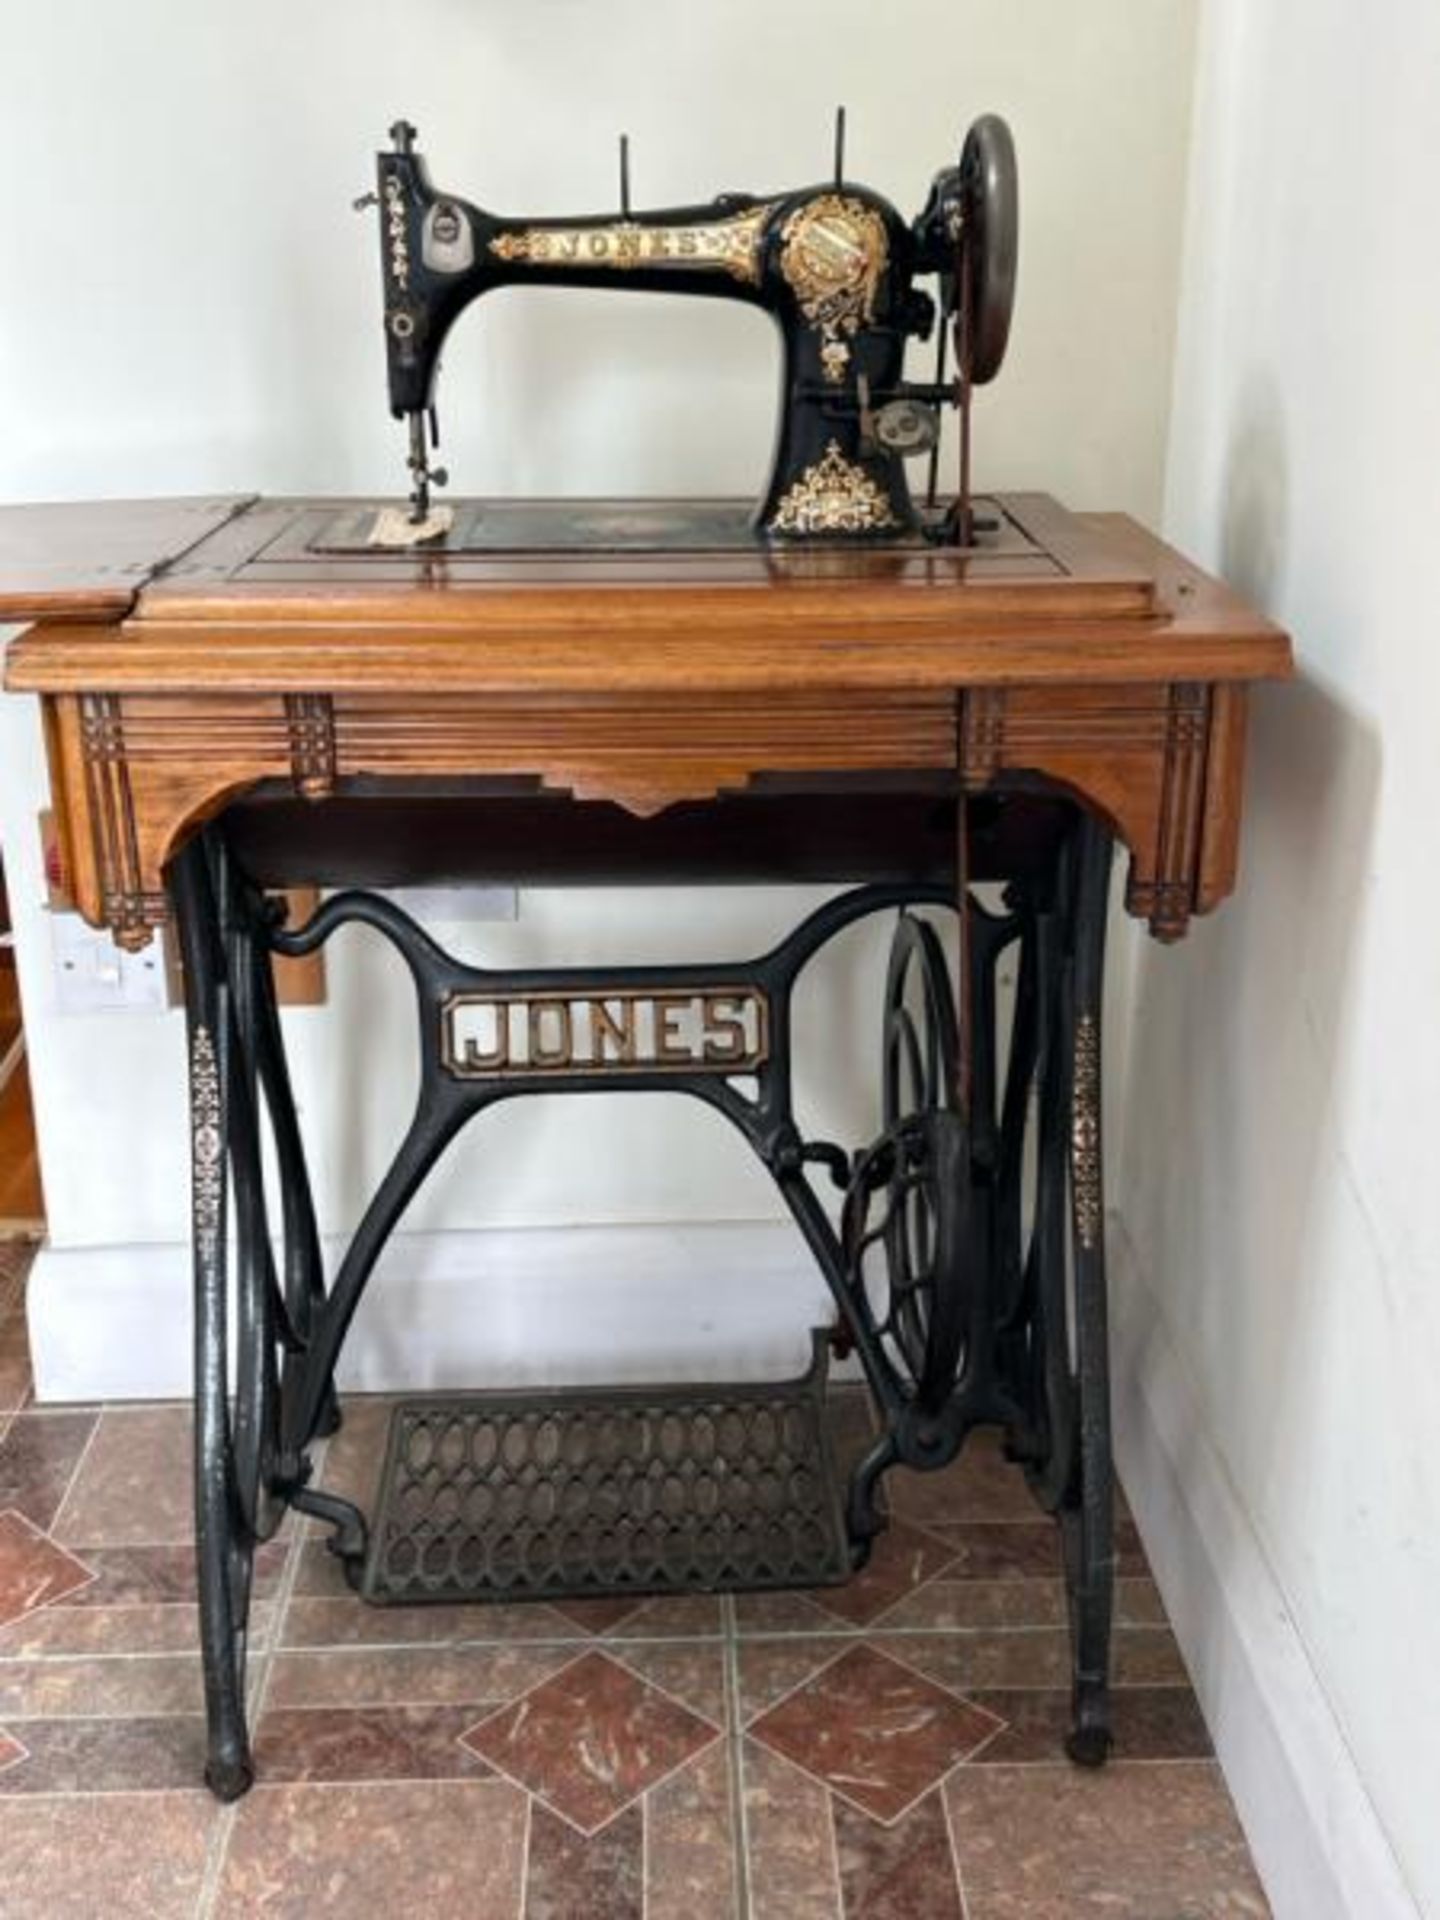 Jones sewing machine number 33225 with flip top table 75cm high (collection from private residence